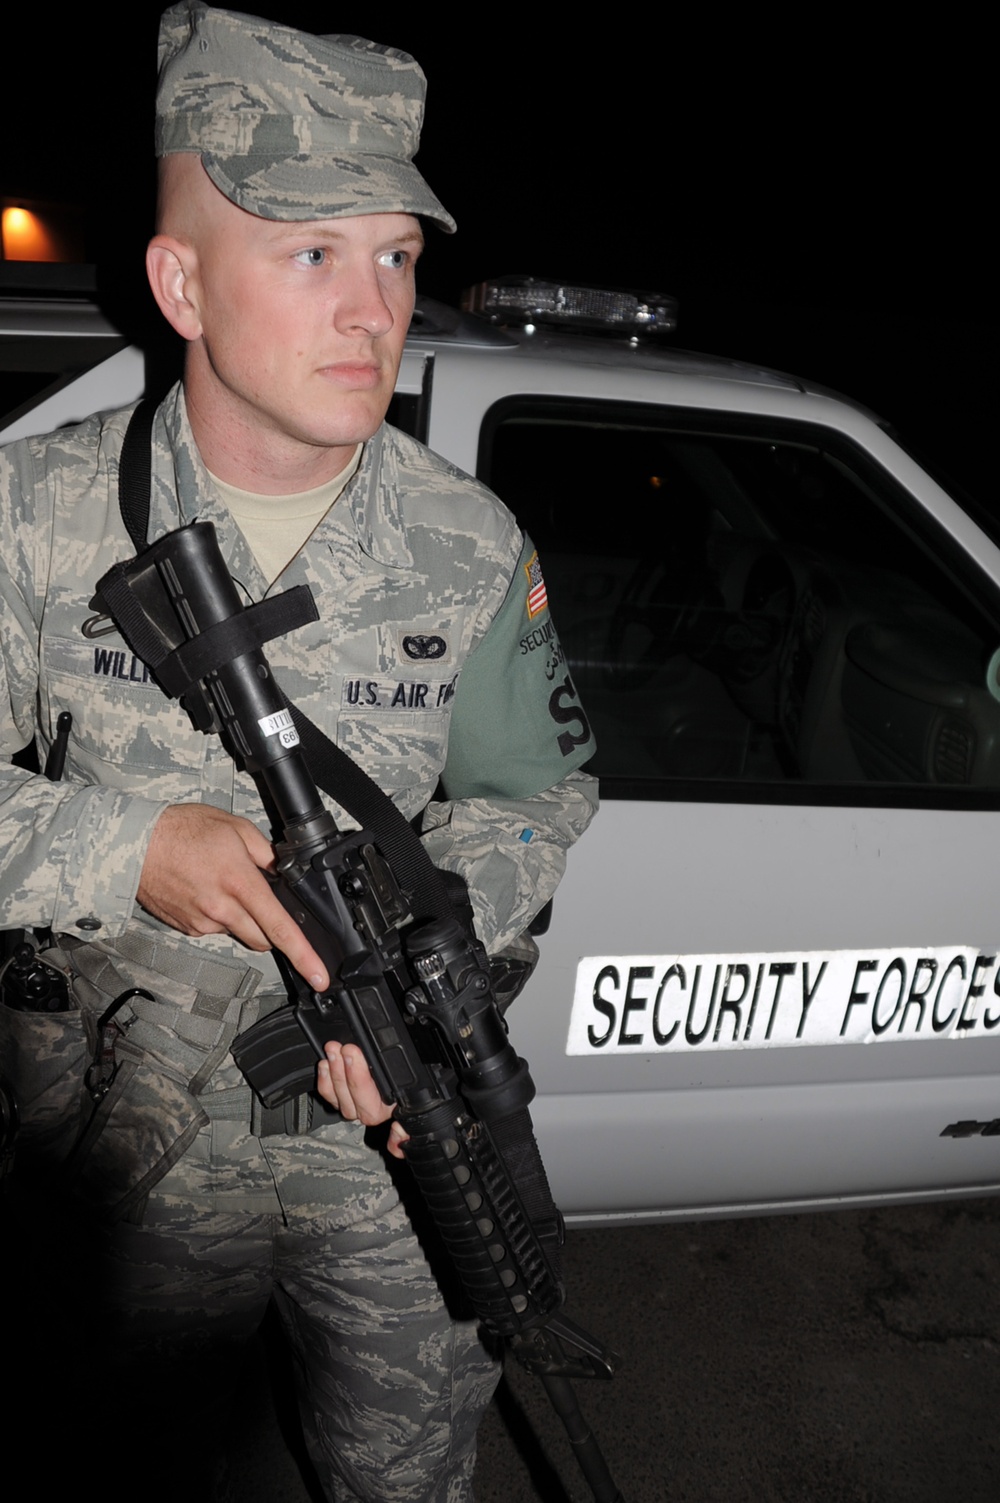 Elmendorf Airman, Plant City Native, Supports Security Forces Efforts in Southwest Asia